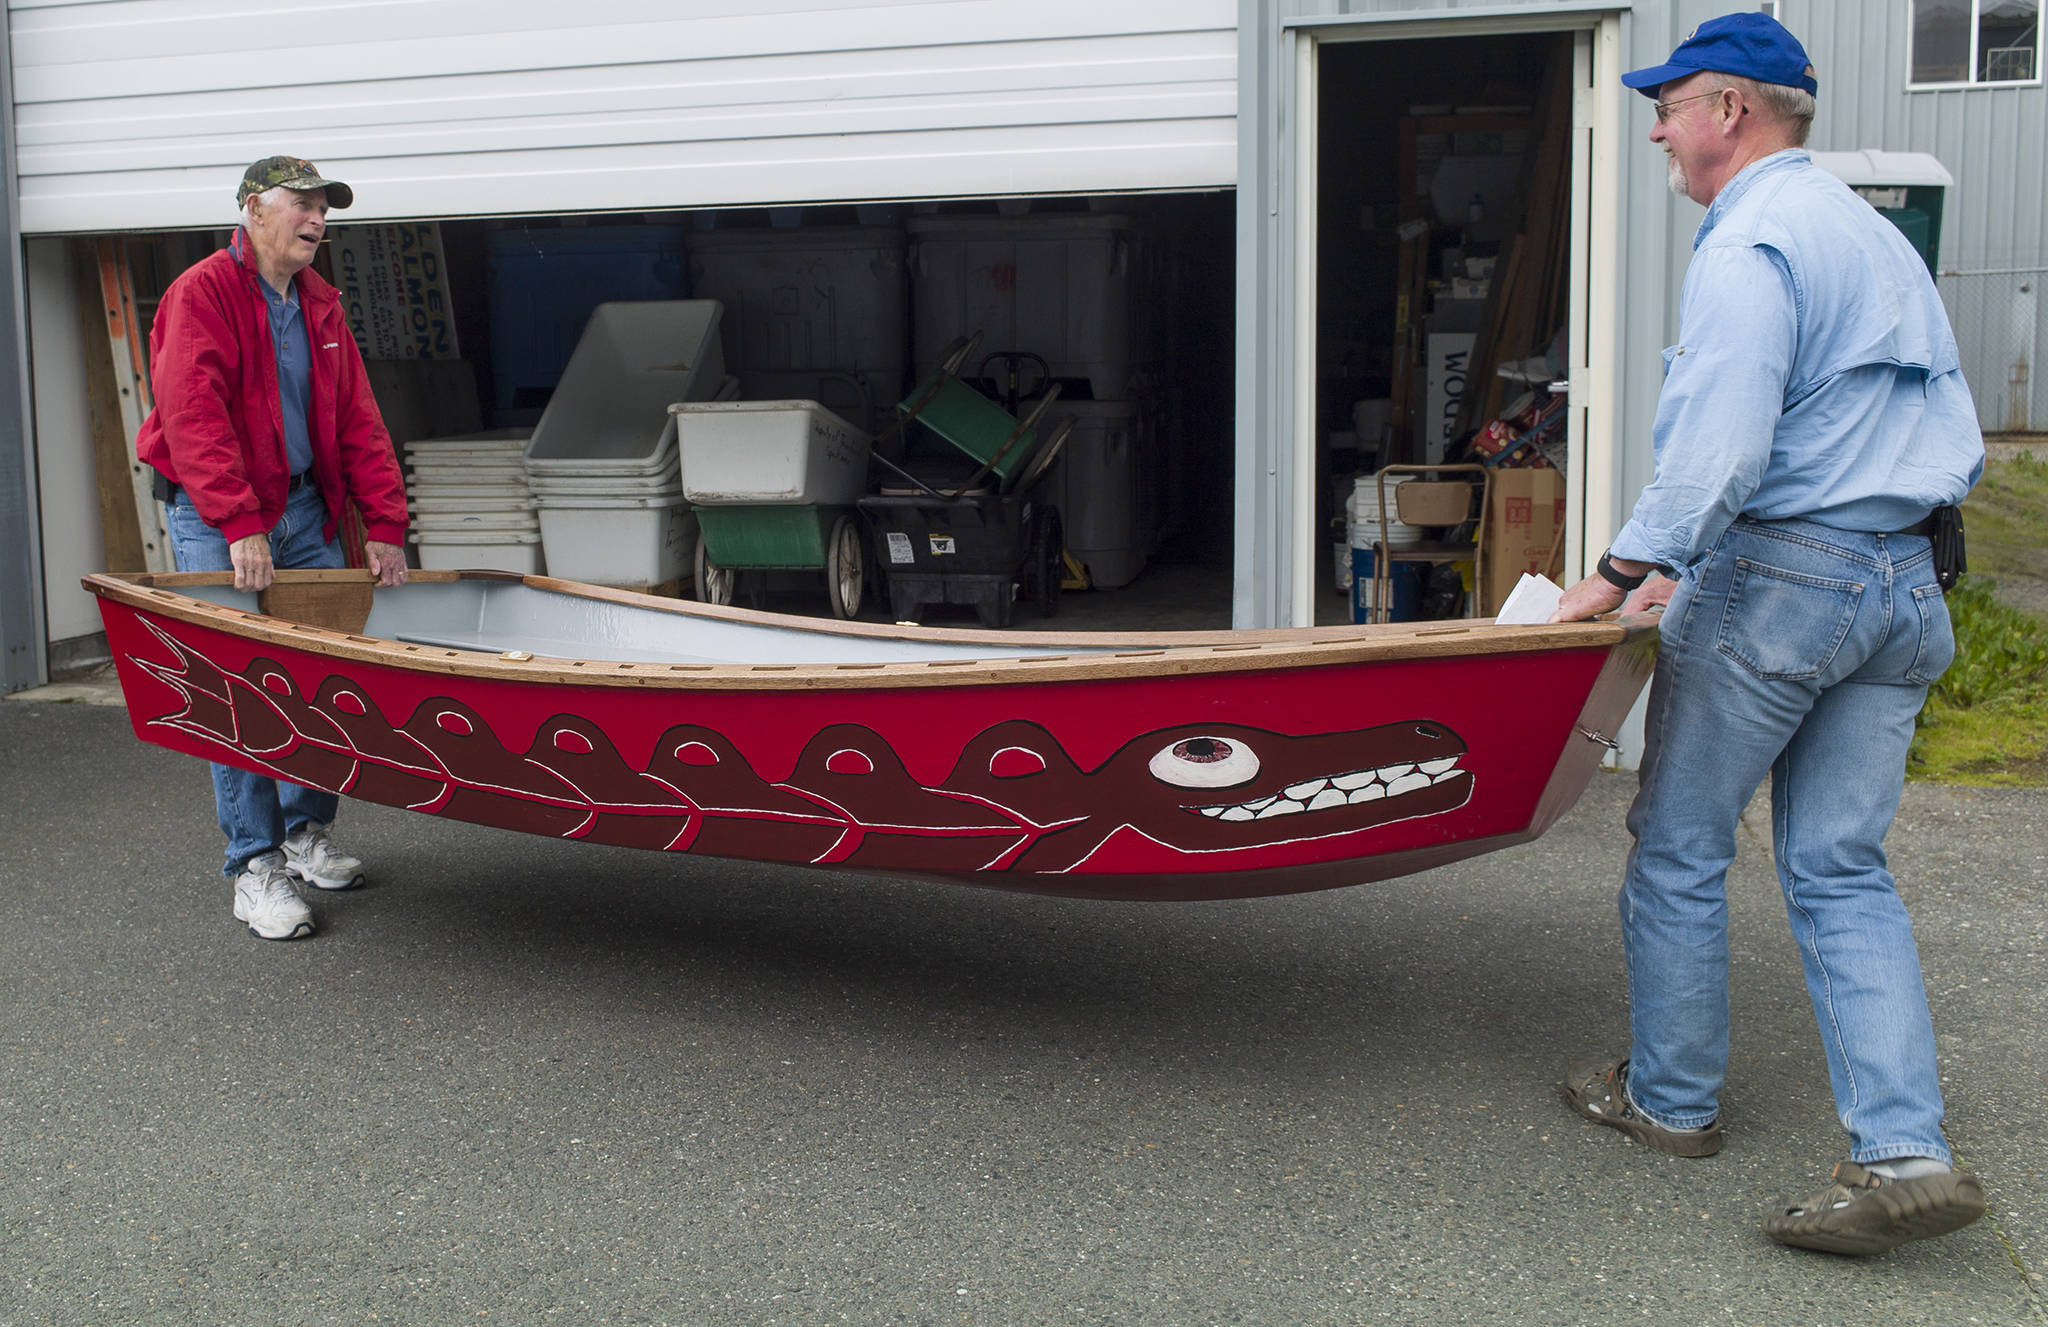 Ron Somerville, left, and Doug Larsen, of Territorial Sportsmen Inc., show on Monday, July 17, 2017, a 10-foot wood and fiberglass boat built and donated by Juneau-Douglas High School students. The boat will be a prize for the biggest fish caught by a youth, 16 years and younger, during next month’s Golden North Salmon Derby. (Michael Penn | Juneau Empire)